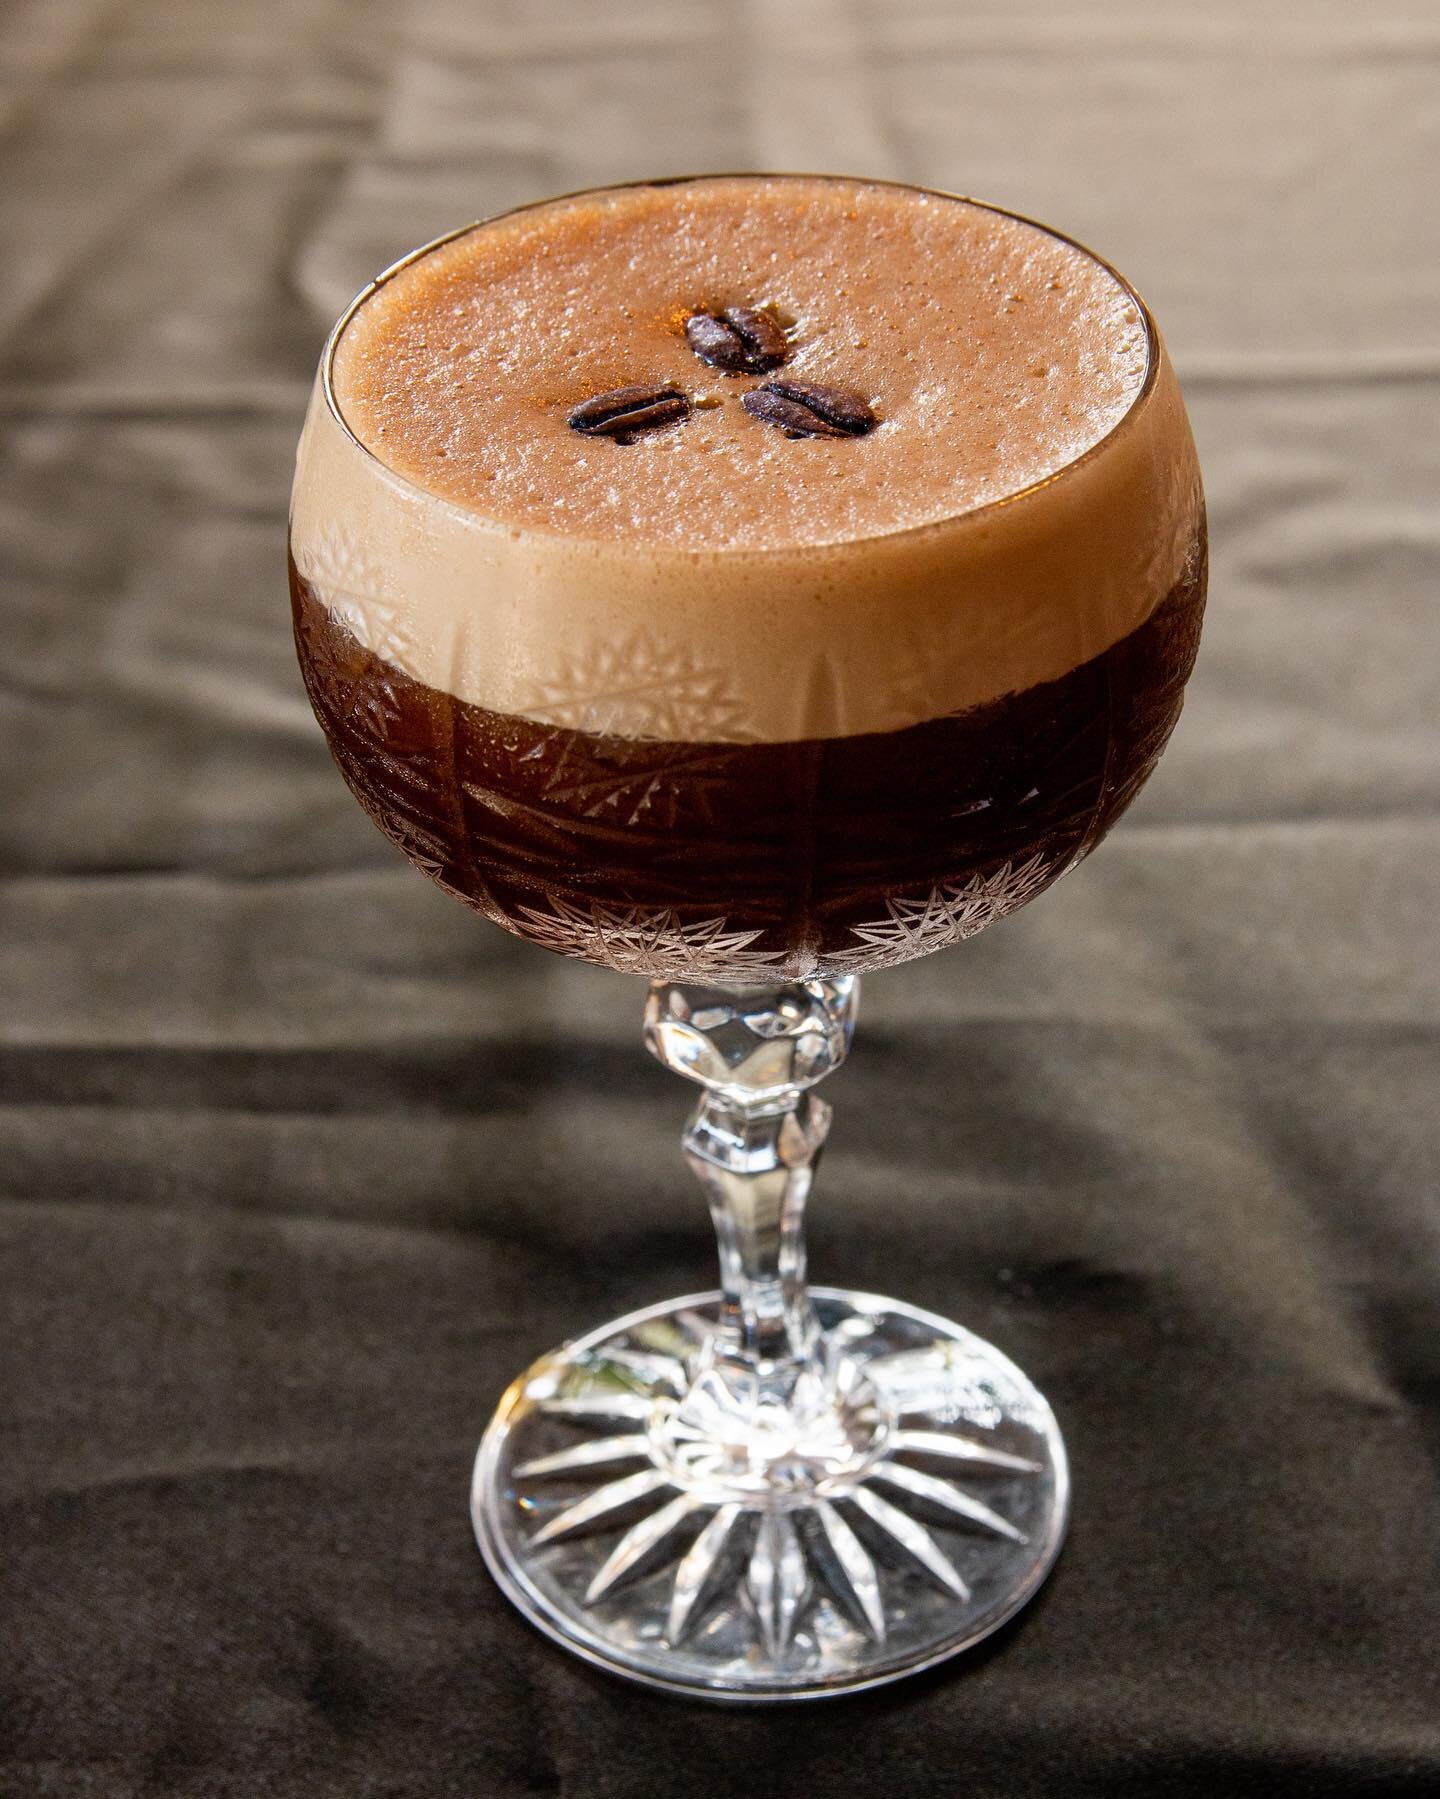 The best espresso martini in town can be found at LPSF - we promise you. 

The Cost of Consciousness 💸
Single Origin Cold Brew Coffee from our friends at @kismet.coffeebloom | Madagascar Vanilla infused Elit Vodka | St. George Spirits NOLA Coffee Li